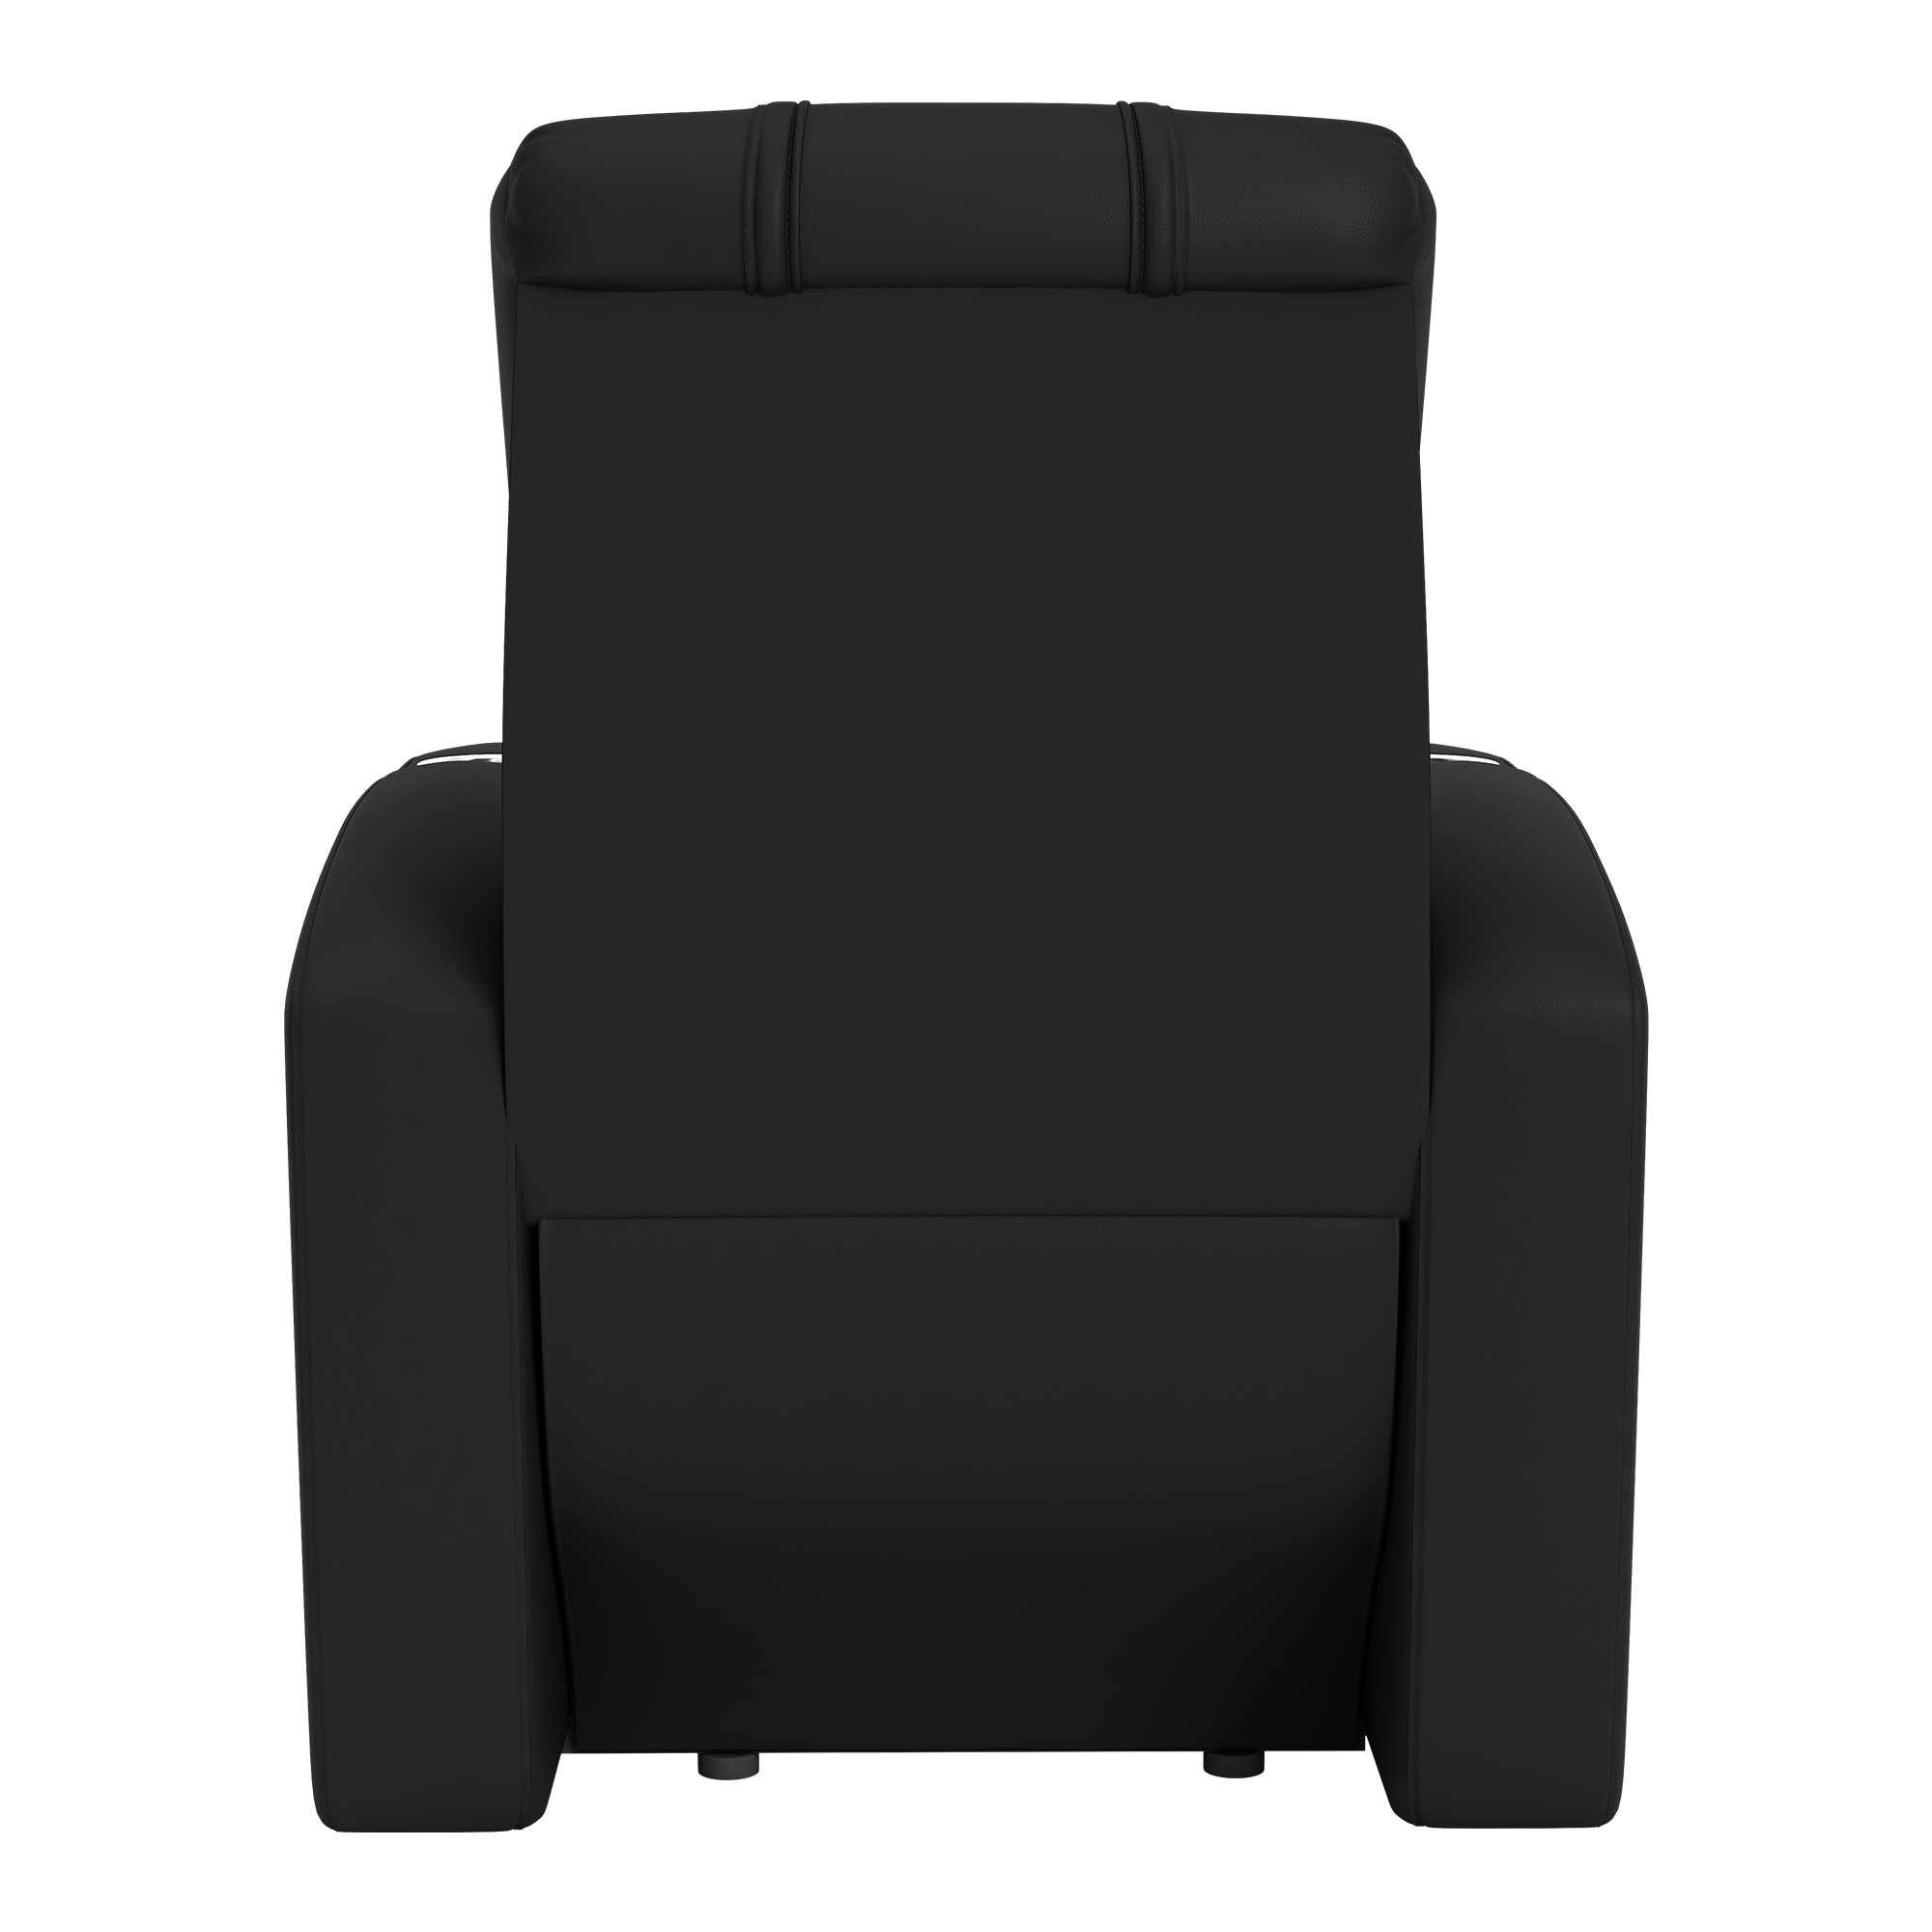 Stealth Recliner with Texas Rangers Cooperstown